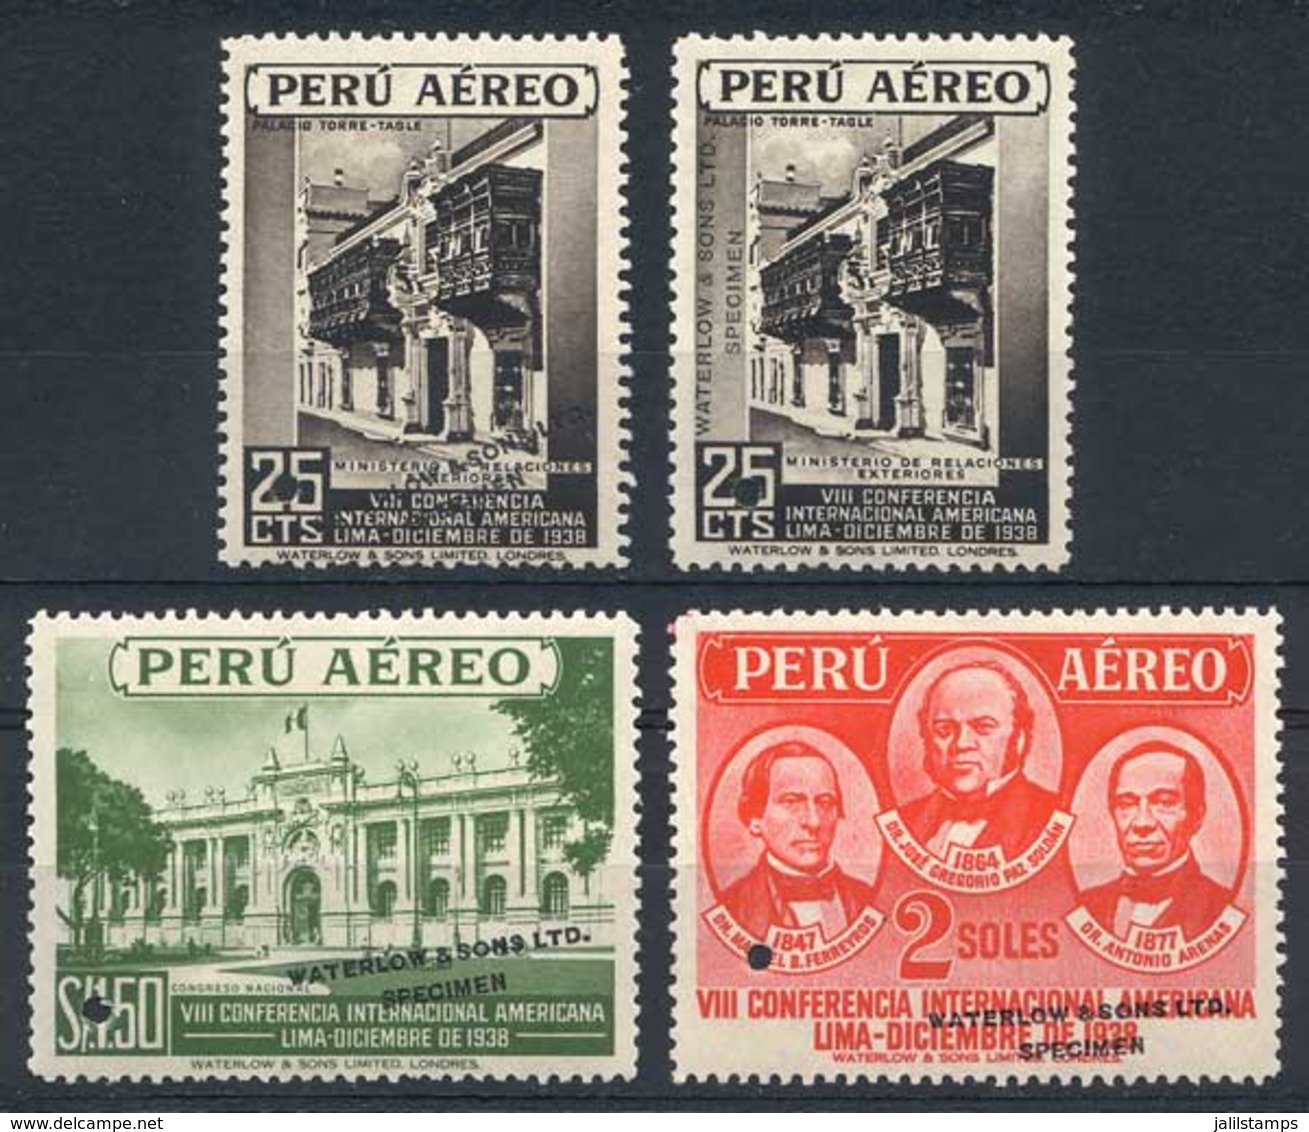 PERU: Yvert 62/64, 1938 Panamerican Congress, 4 Stamps With Little Punch Cancel And Overprinted "WATERLOW & SONS LTD - S - Peru